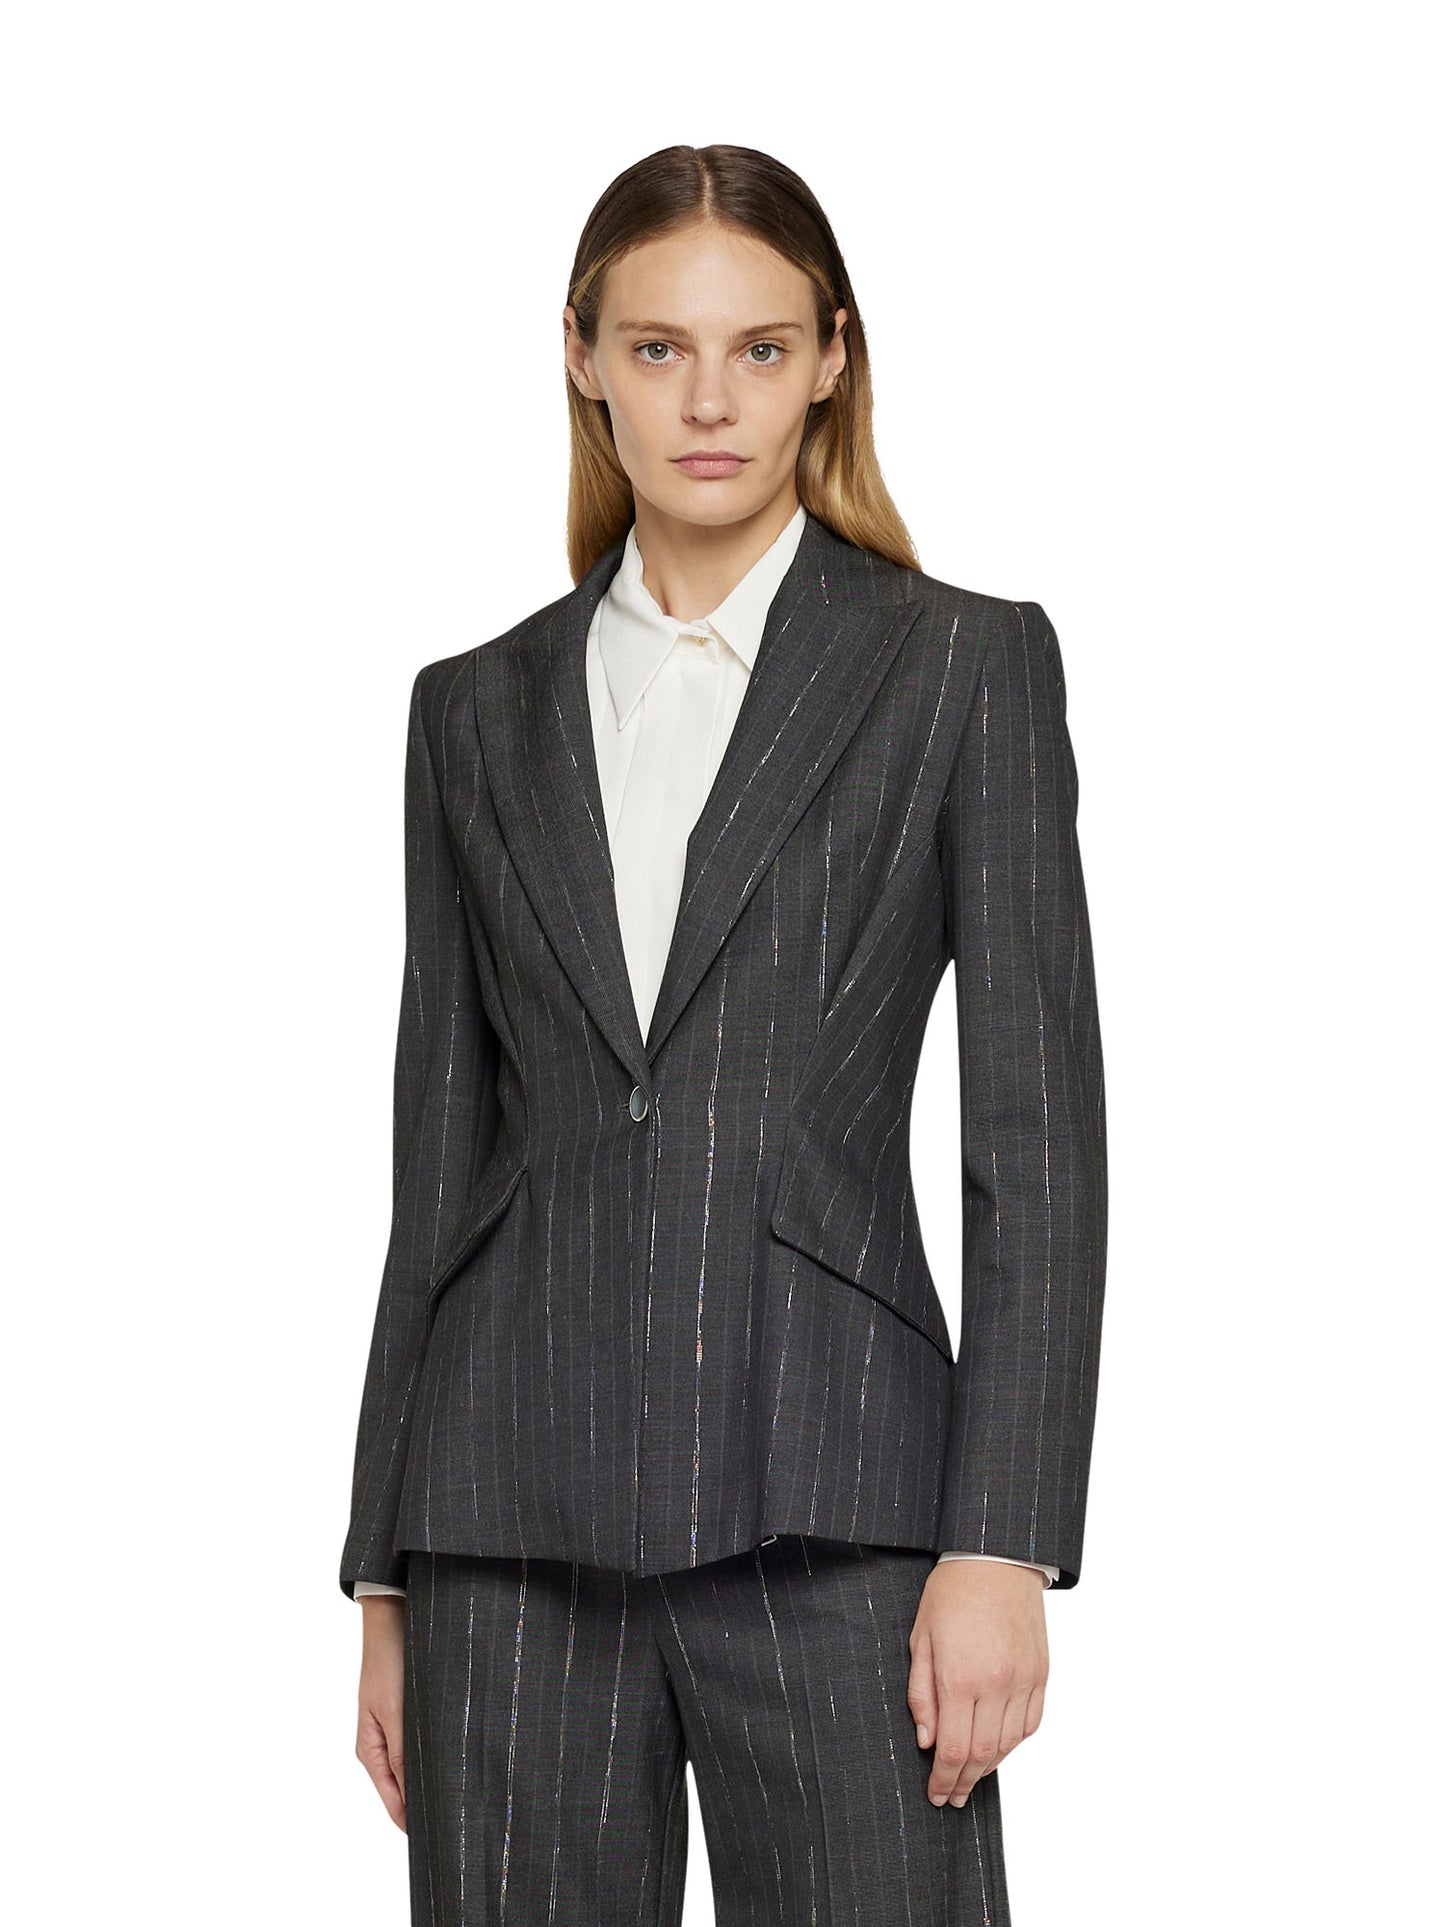 Single-breasted jacket in translucent pinstripe